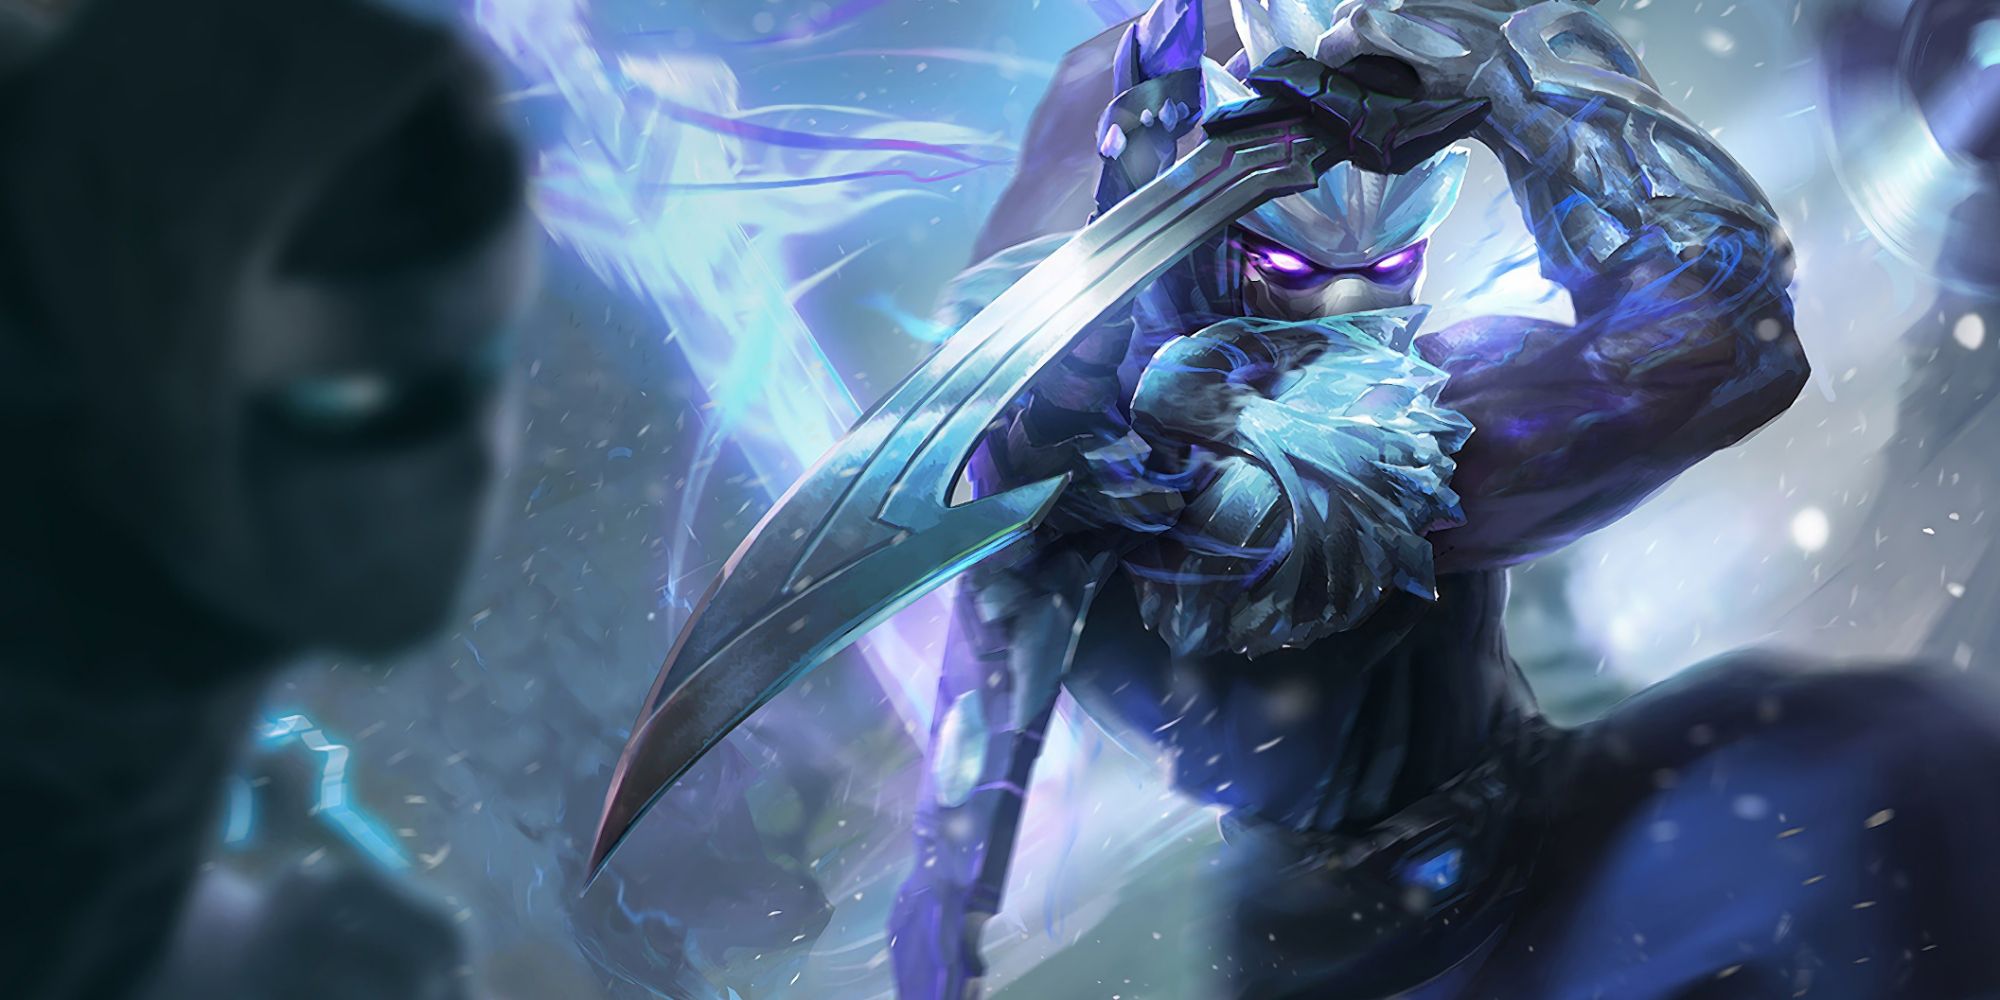 Shen looking like Sub Zero as he faces off against Shock Blade Zed, his Spirit Blade visible as he brandishes his blades